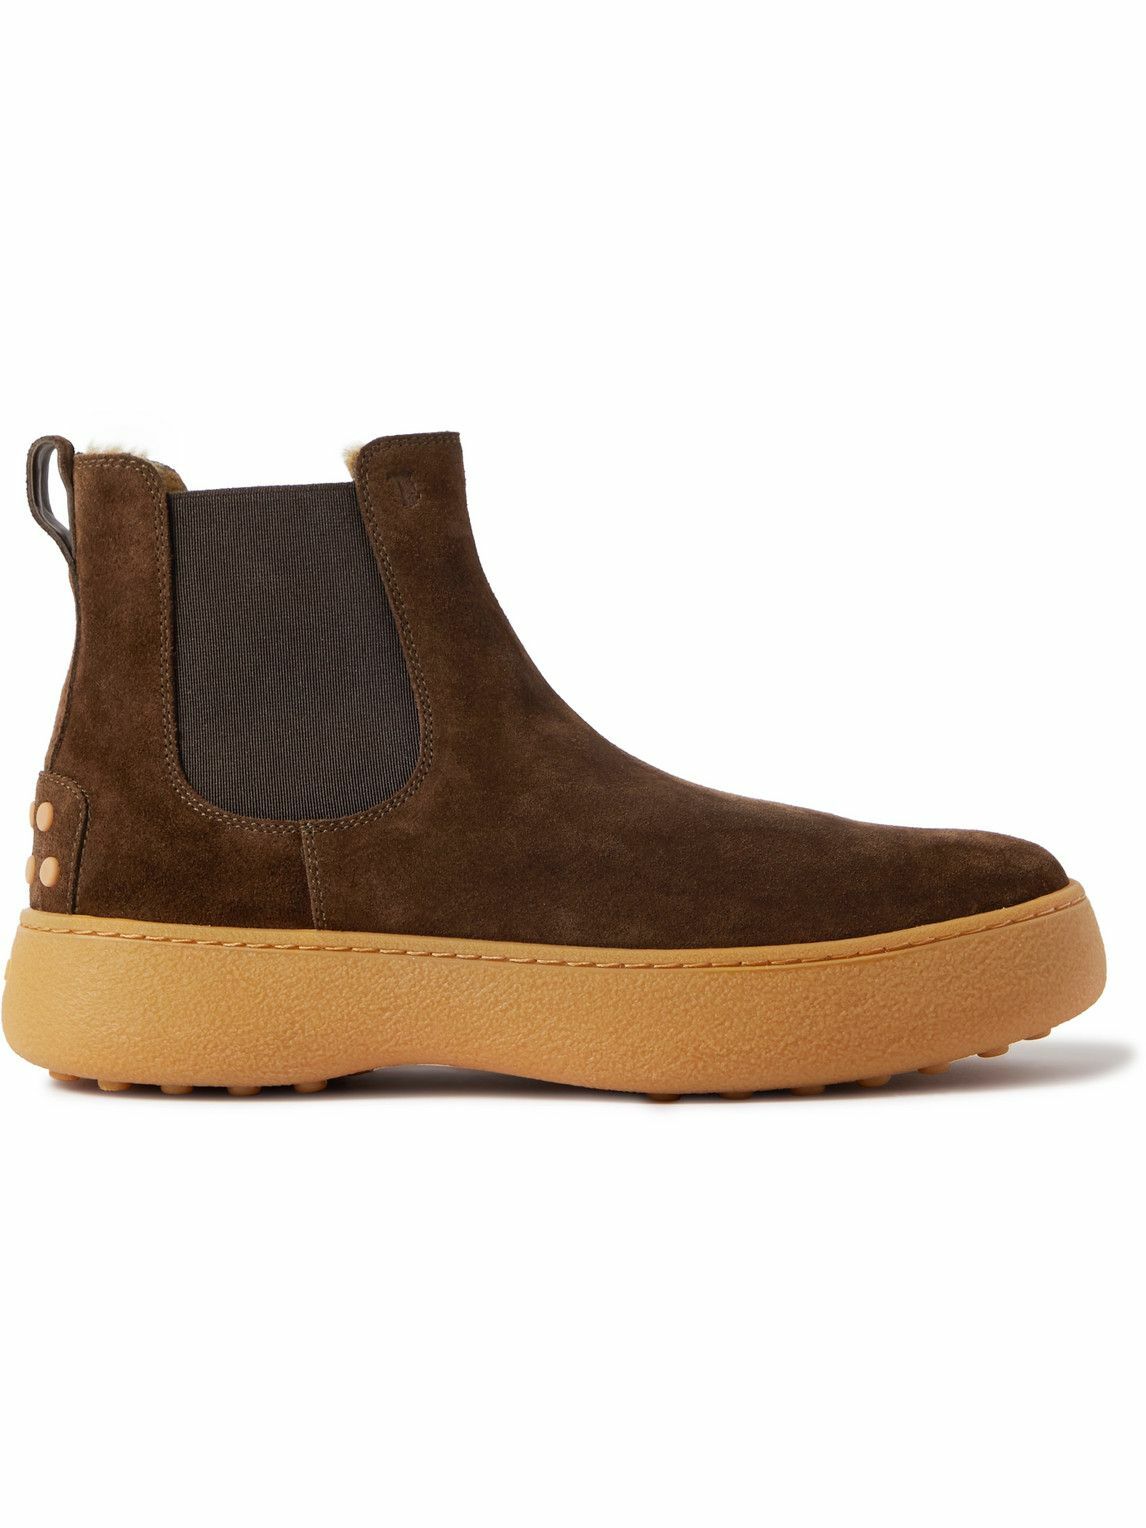 Tod's - Shearling-Lined Suede Chelsea Boots - Brown Tod's